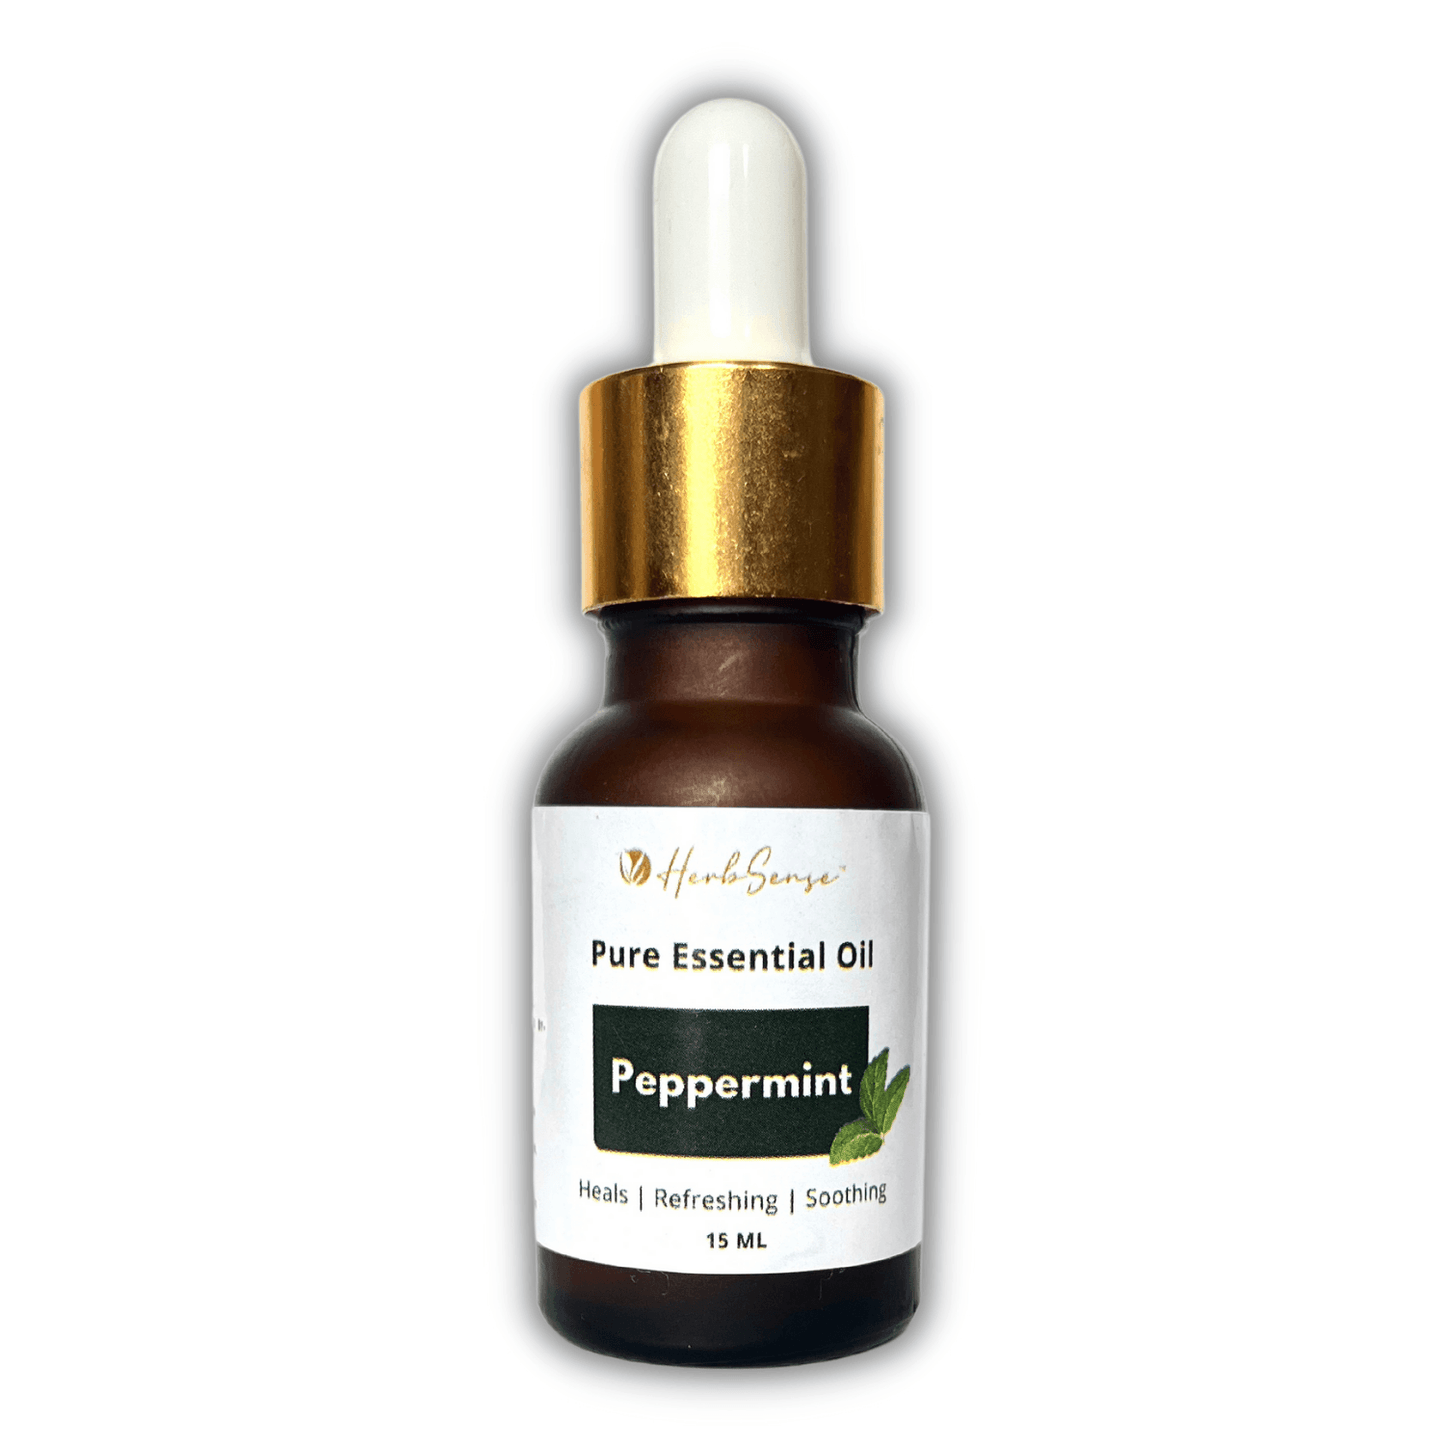 Peppermint Essential Oil For Hair Regrowth, Skin, Face, Cold, Congestion, Steam Inhaler, Diffuser Oil. 100% Natural, Undiluted, Pure & Therapeutic Grade Essential Oil.- 15ML - Herbsense